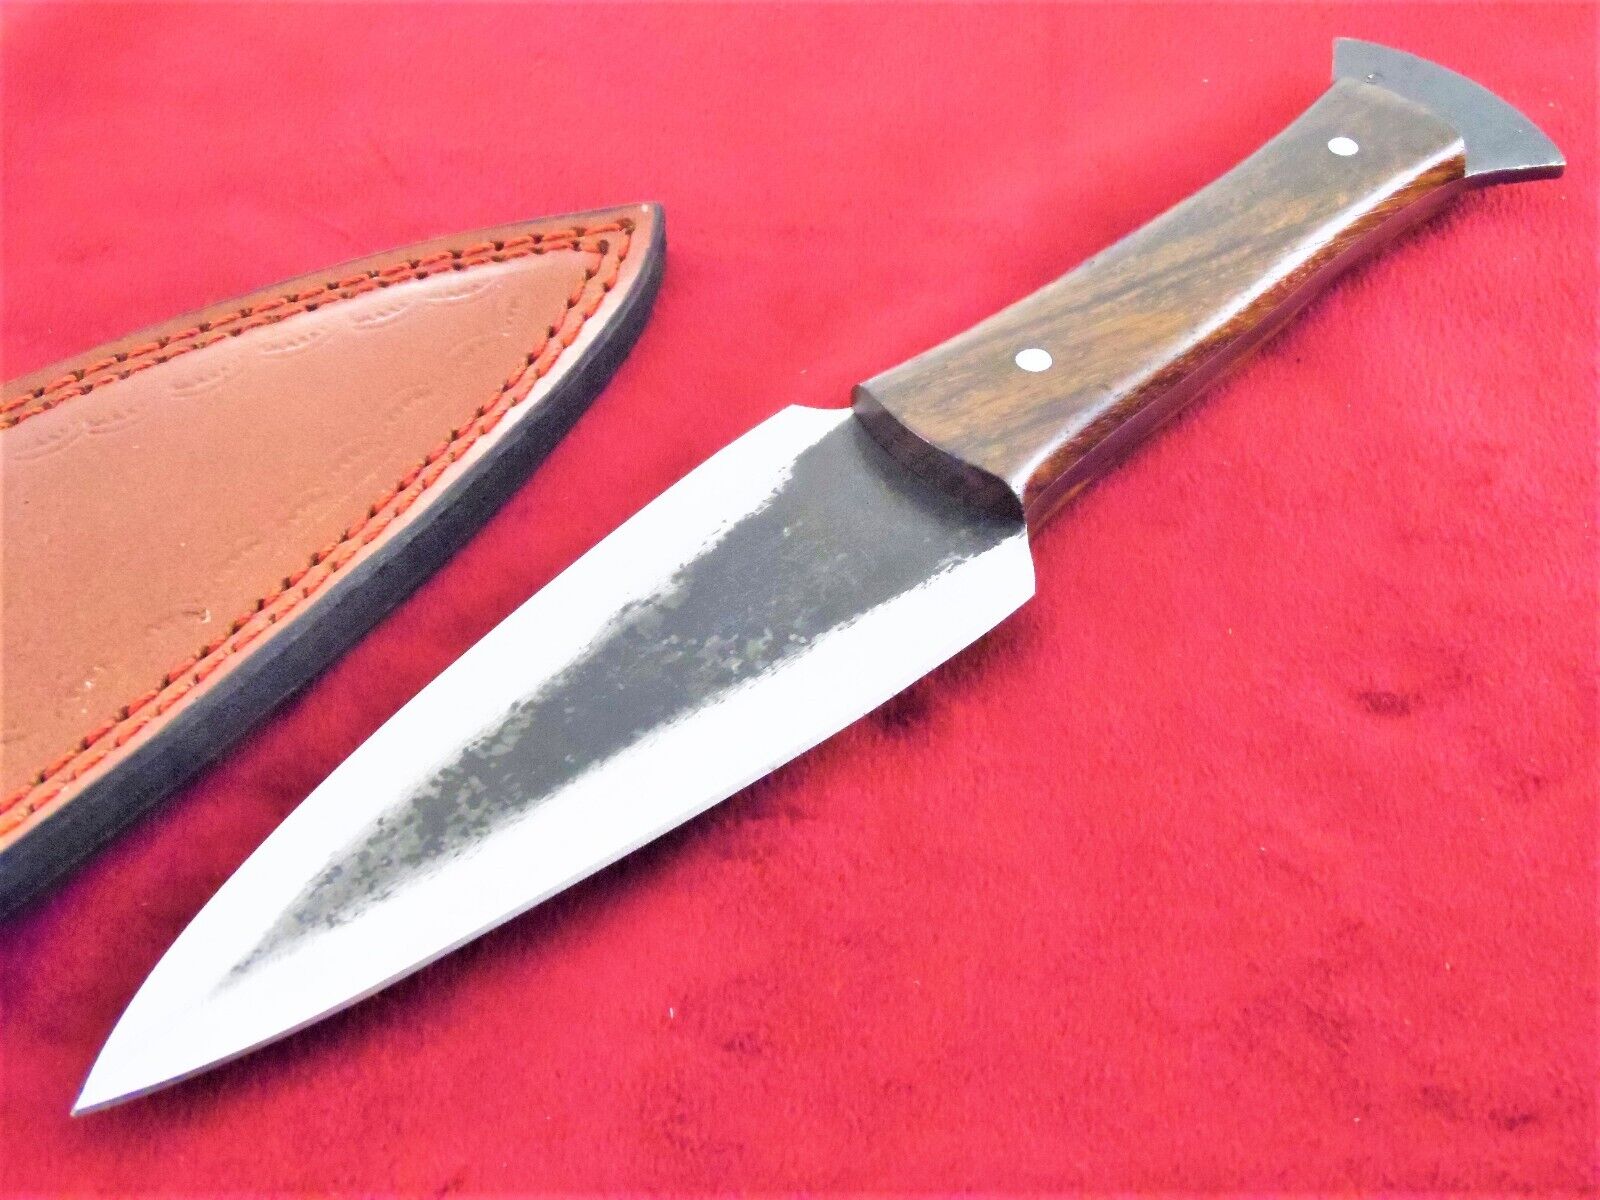 CUSTOM HAND FORGED HIGH CARBON STEEL DOUBLE EDGE DAGGER HUNTING CAMPING KNIFE